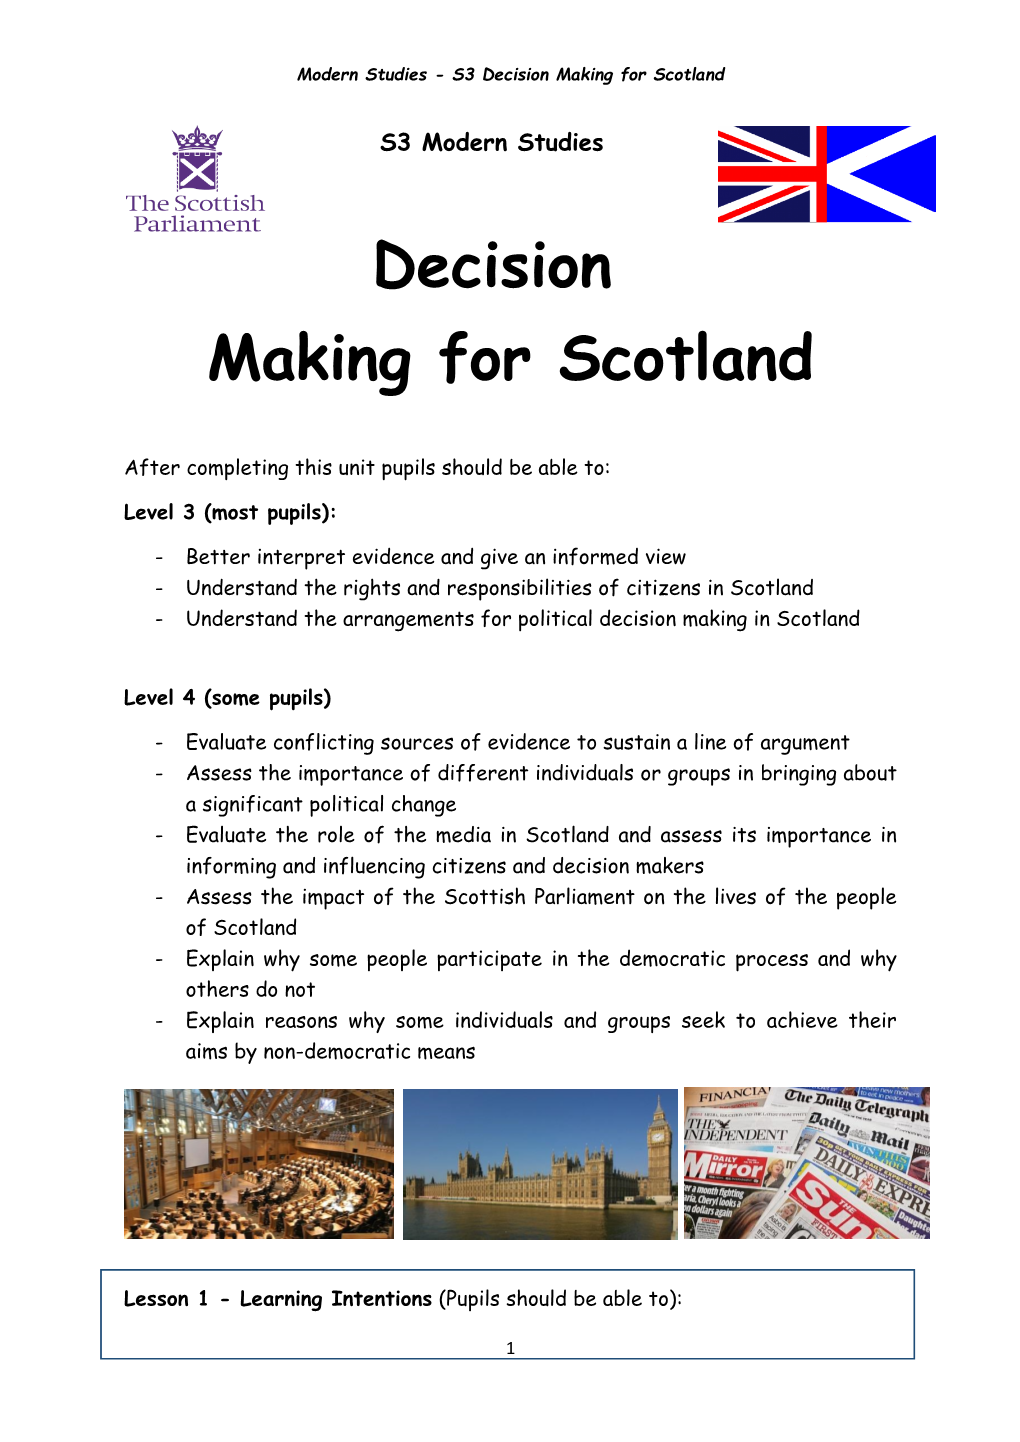 Decision Making for Scotland